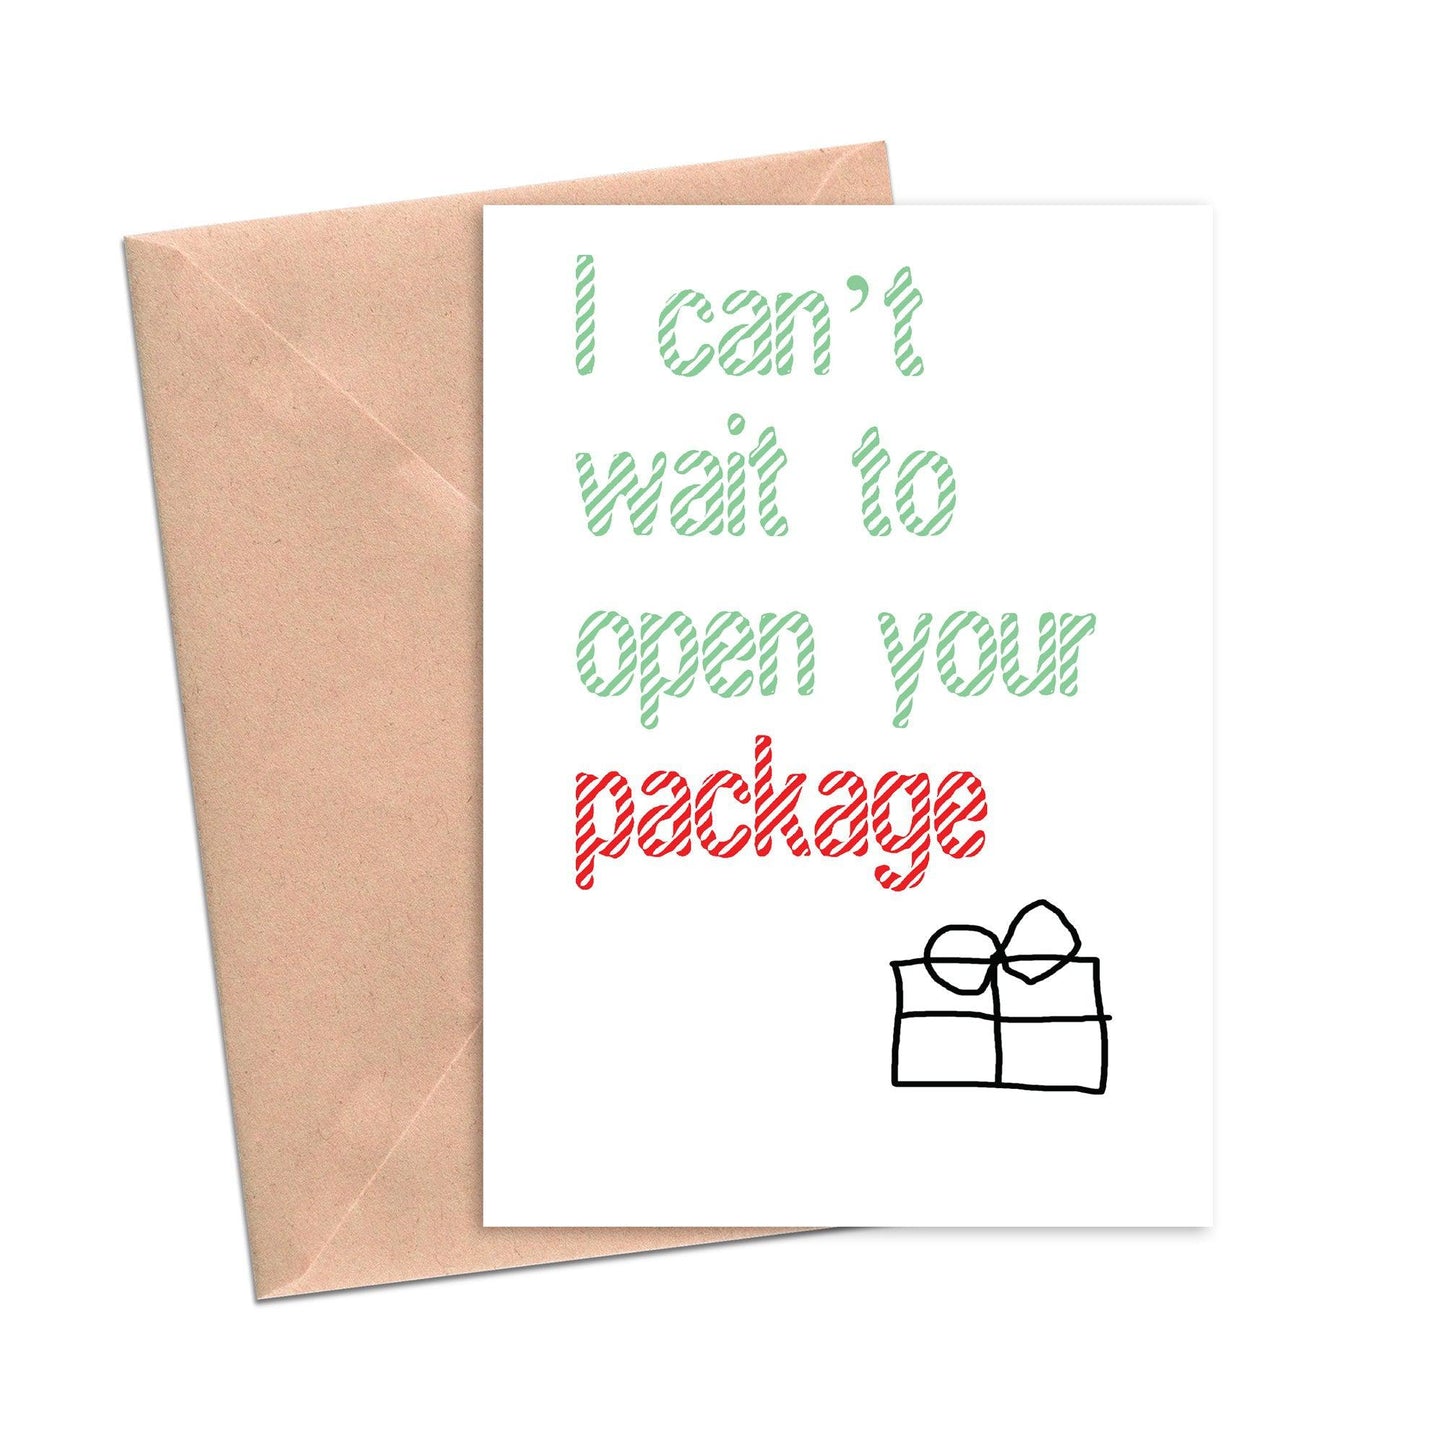 Can't Wait to Open Your Package Christmas Funny Holiday Card-Holiday Cards-Crimson and Clover Studio